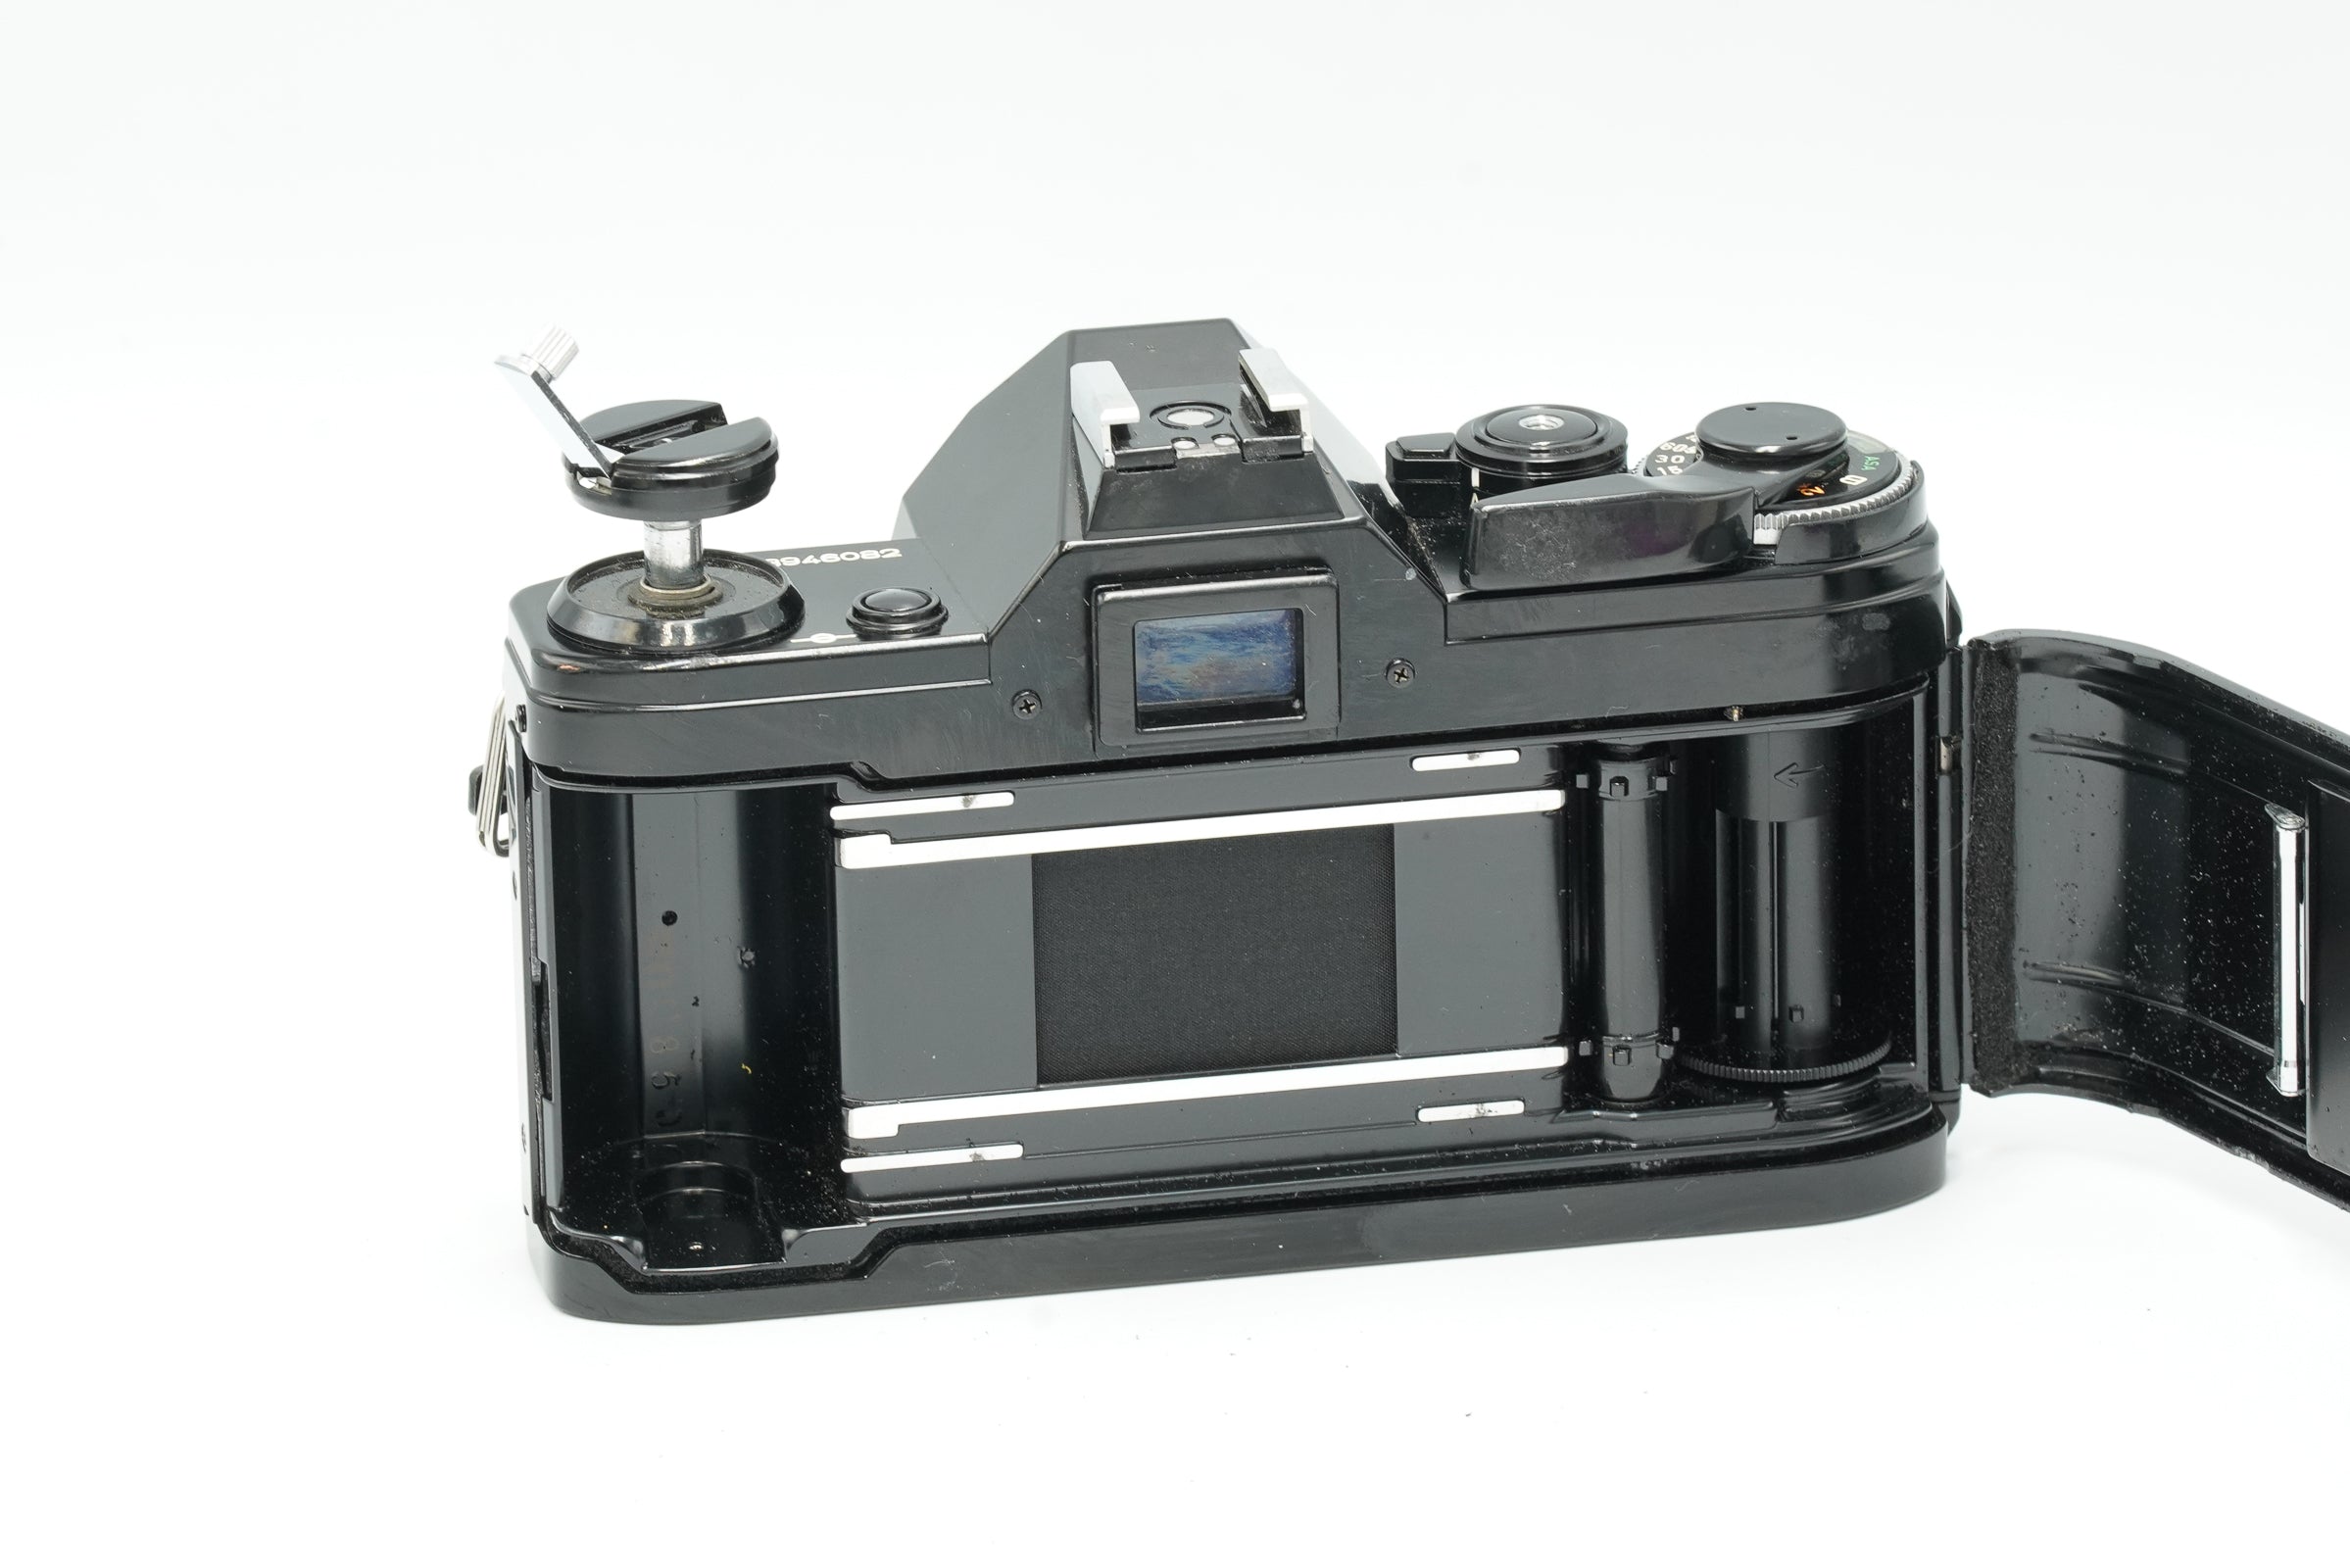 Canon AE1 black, with various lens options